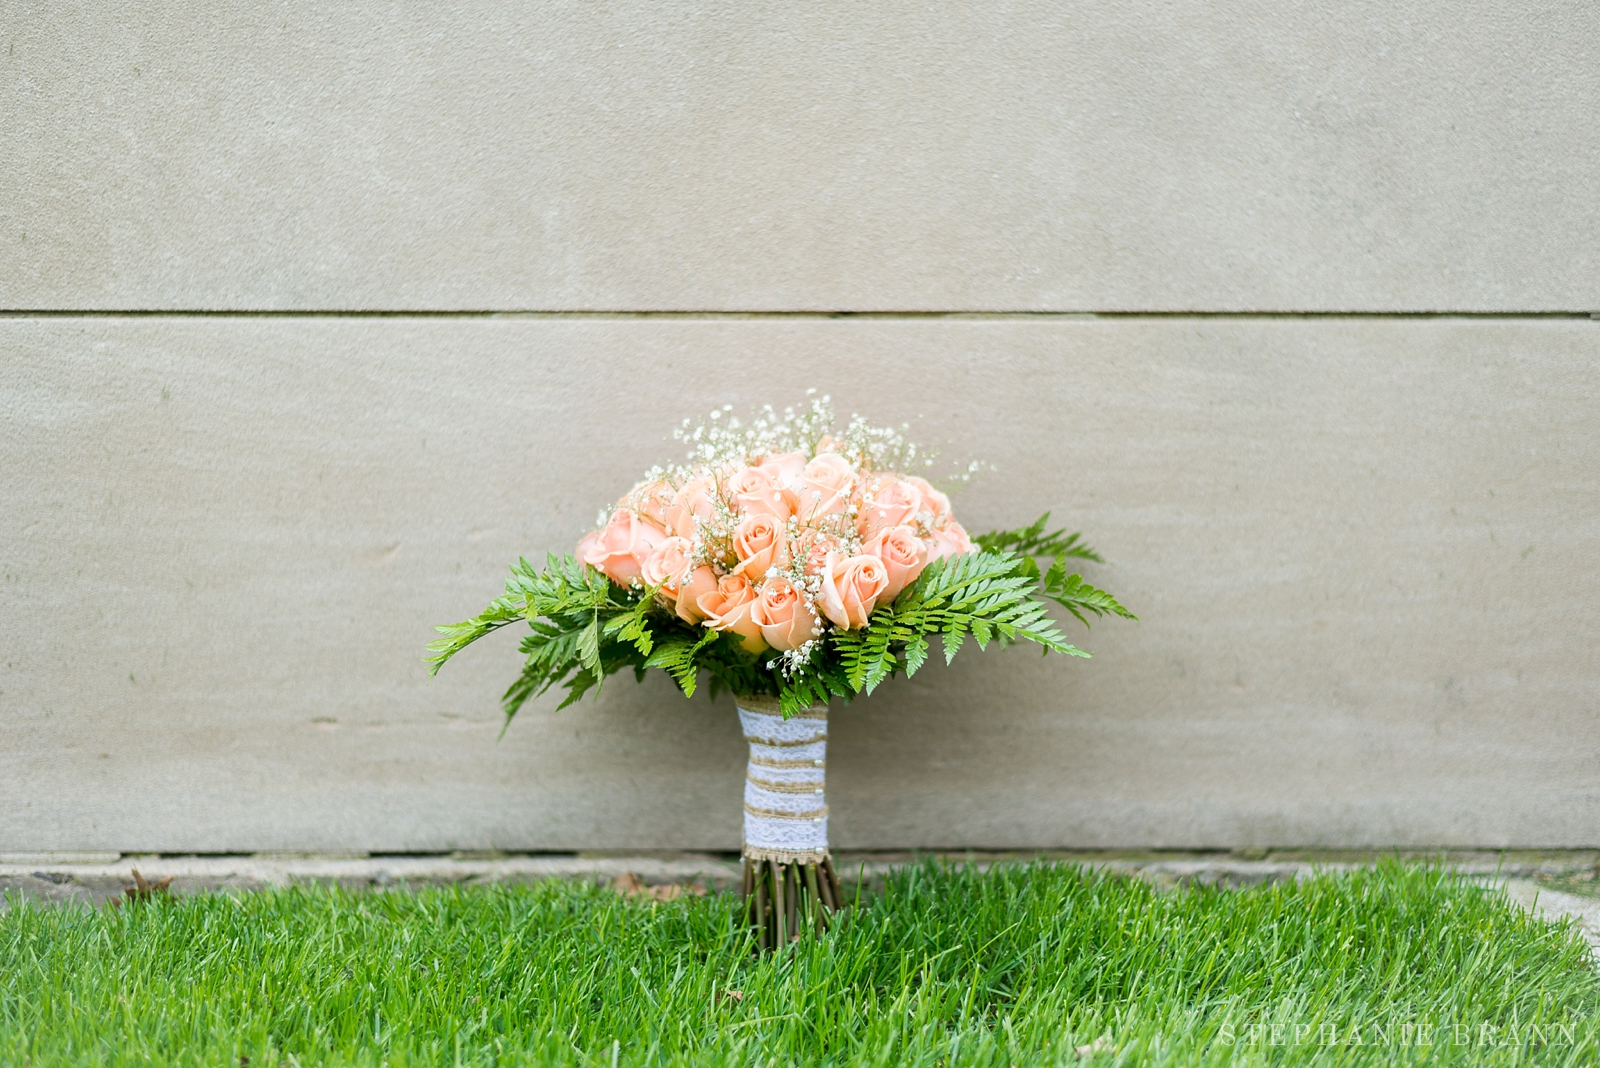 orange roses bouquet with white baby's breath and green fern